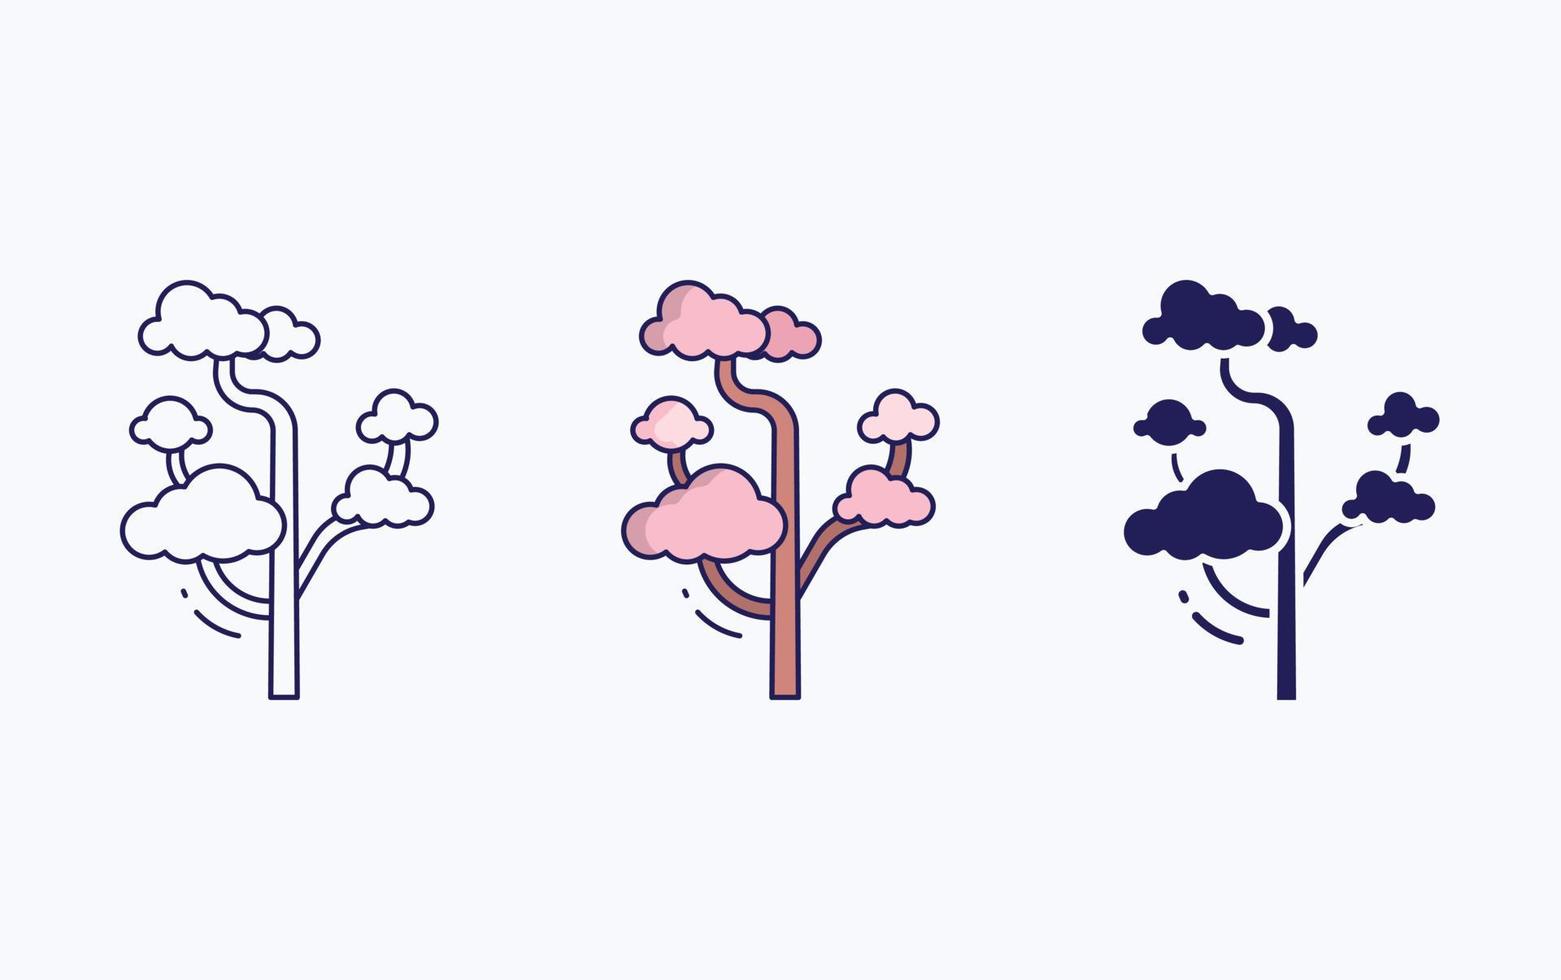 Tree icon, line and glyph vector illustration